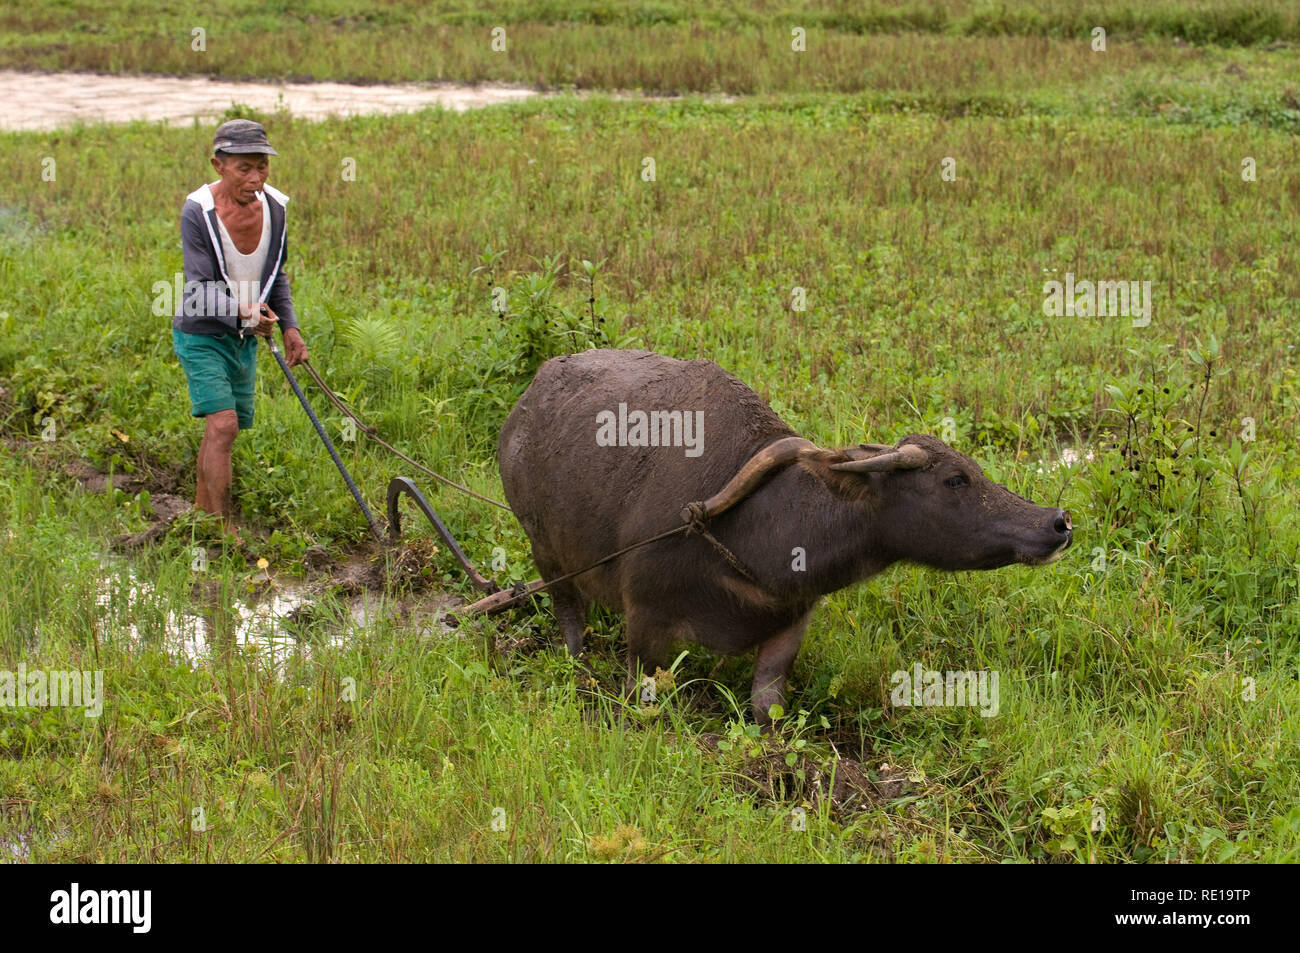 Ox Philippines High Resolution Stock Photography and Images - Alamy